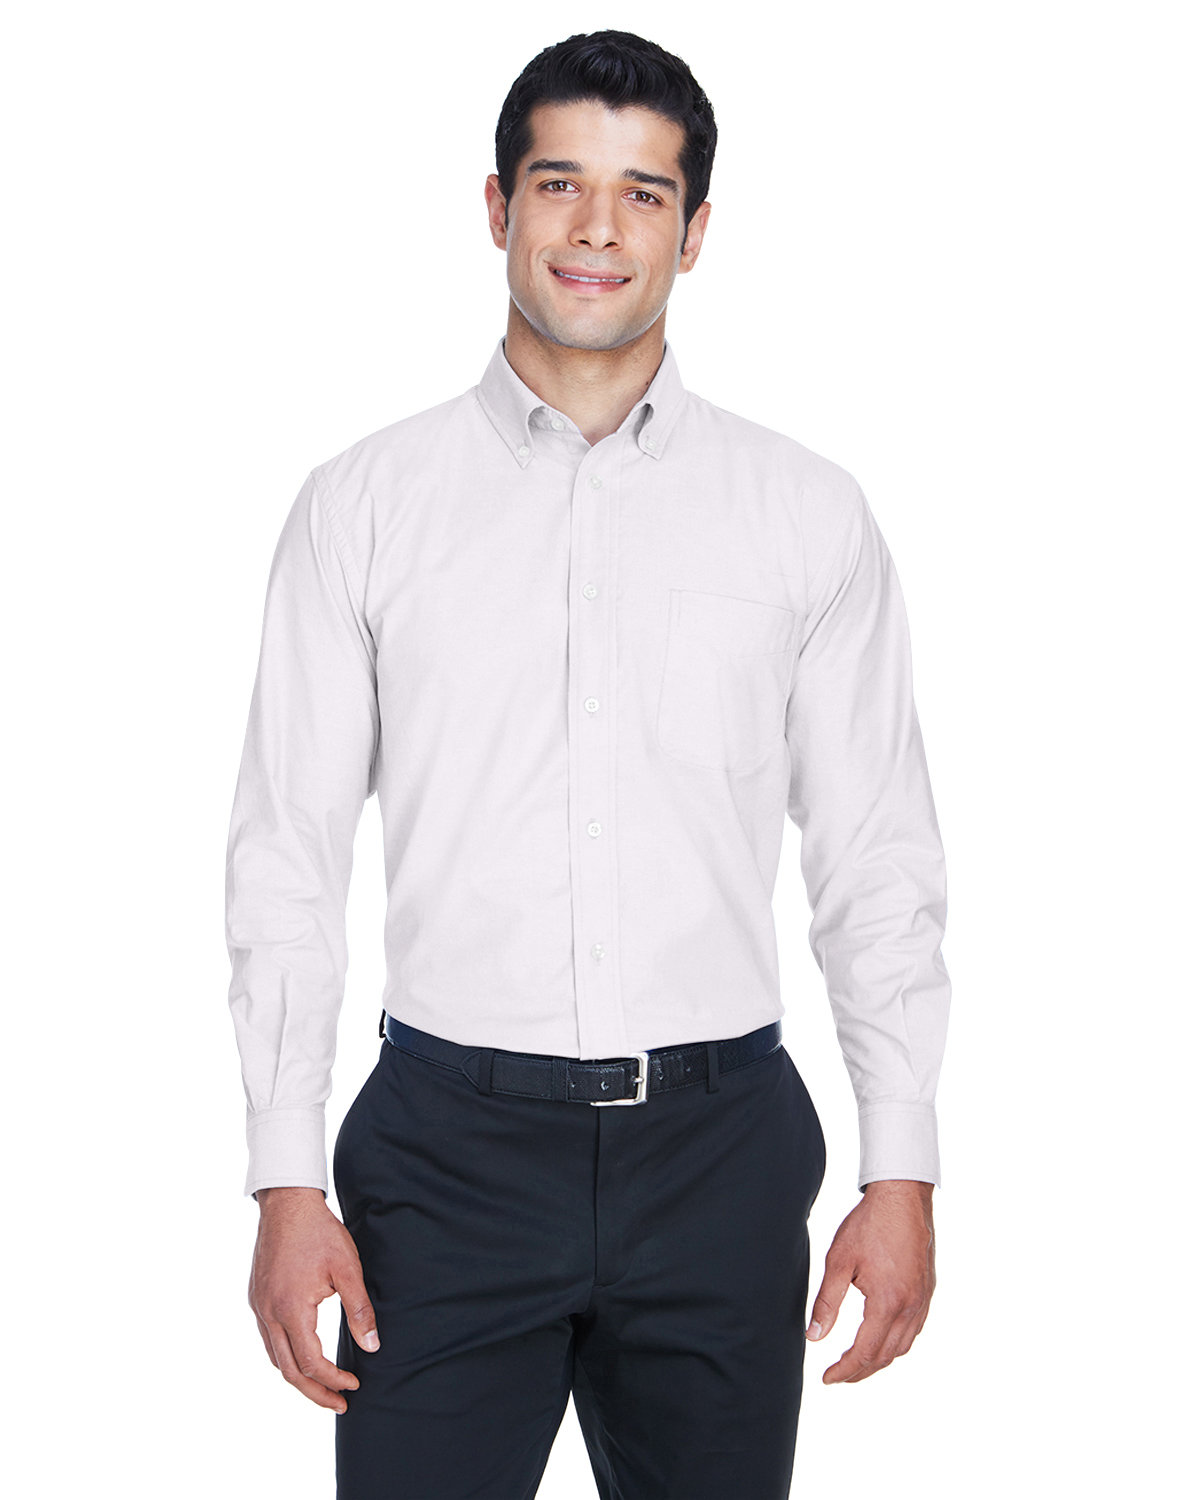 Harriton Men's Long-Sleeve Oxford with Stain-Release WHITE 